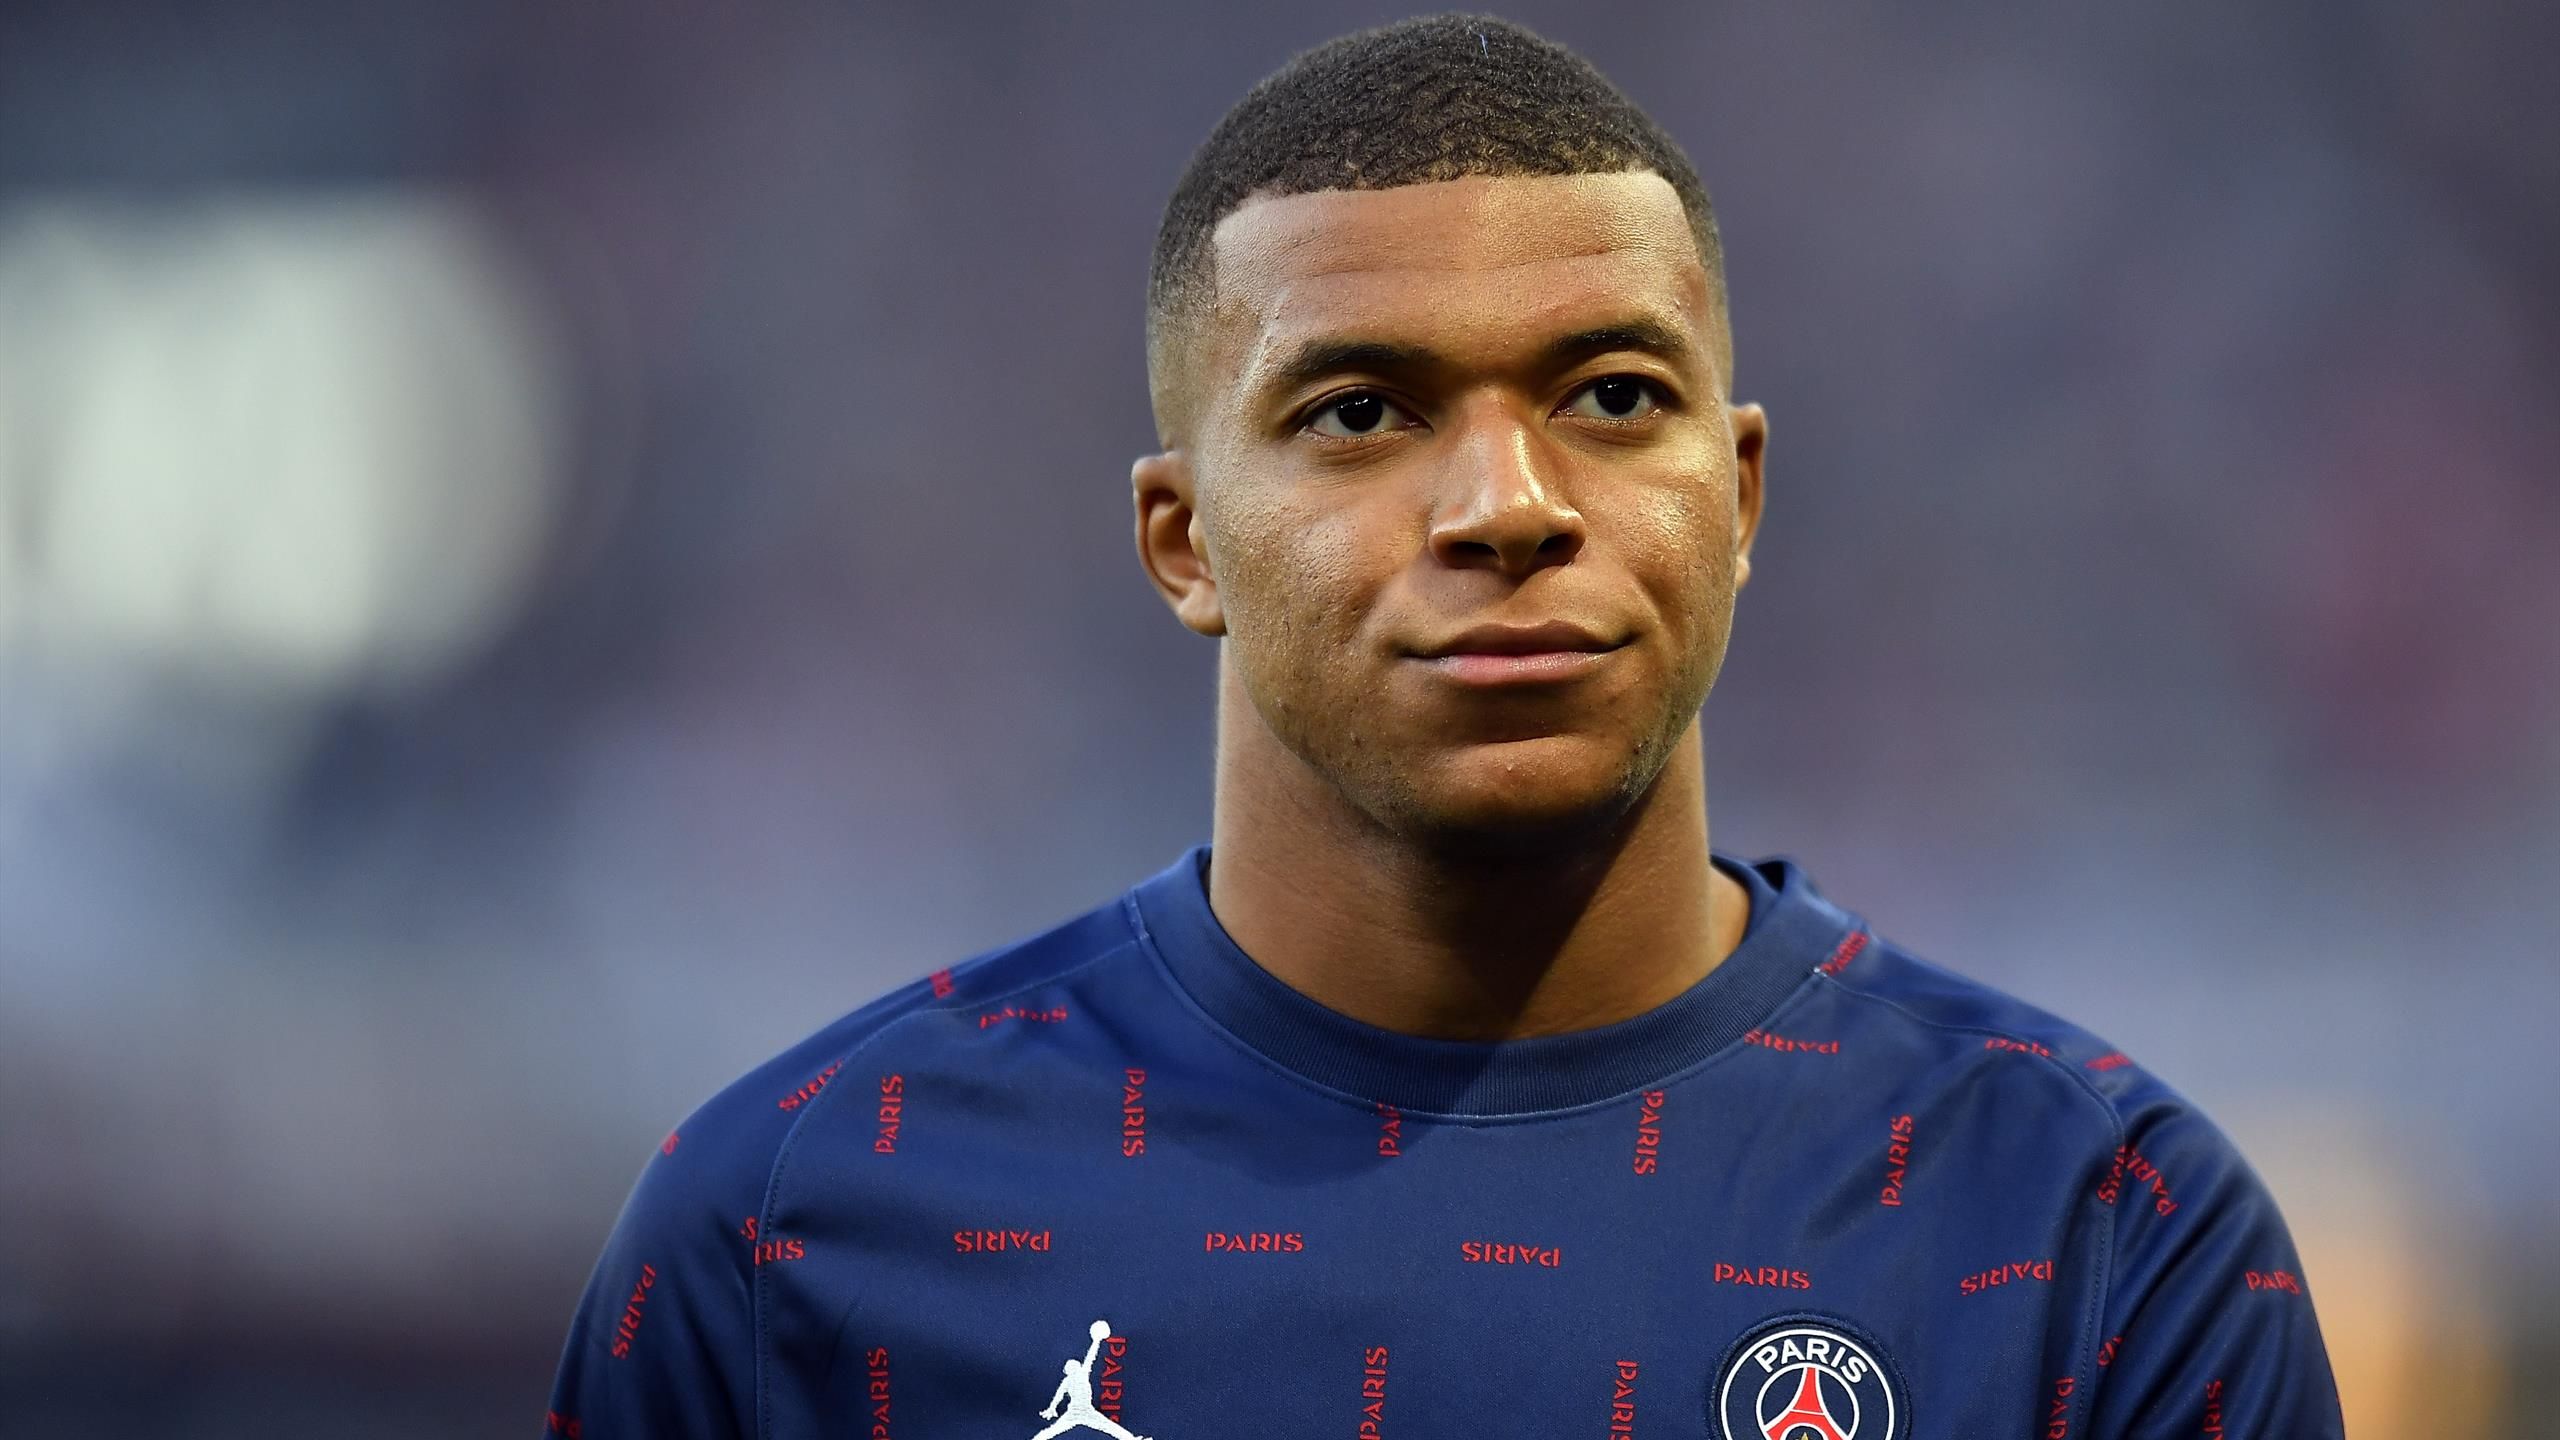 Transfer news - Kylian Mbappe transfer to Real Madrid from PSG imminent and could be announced Friday